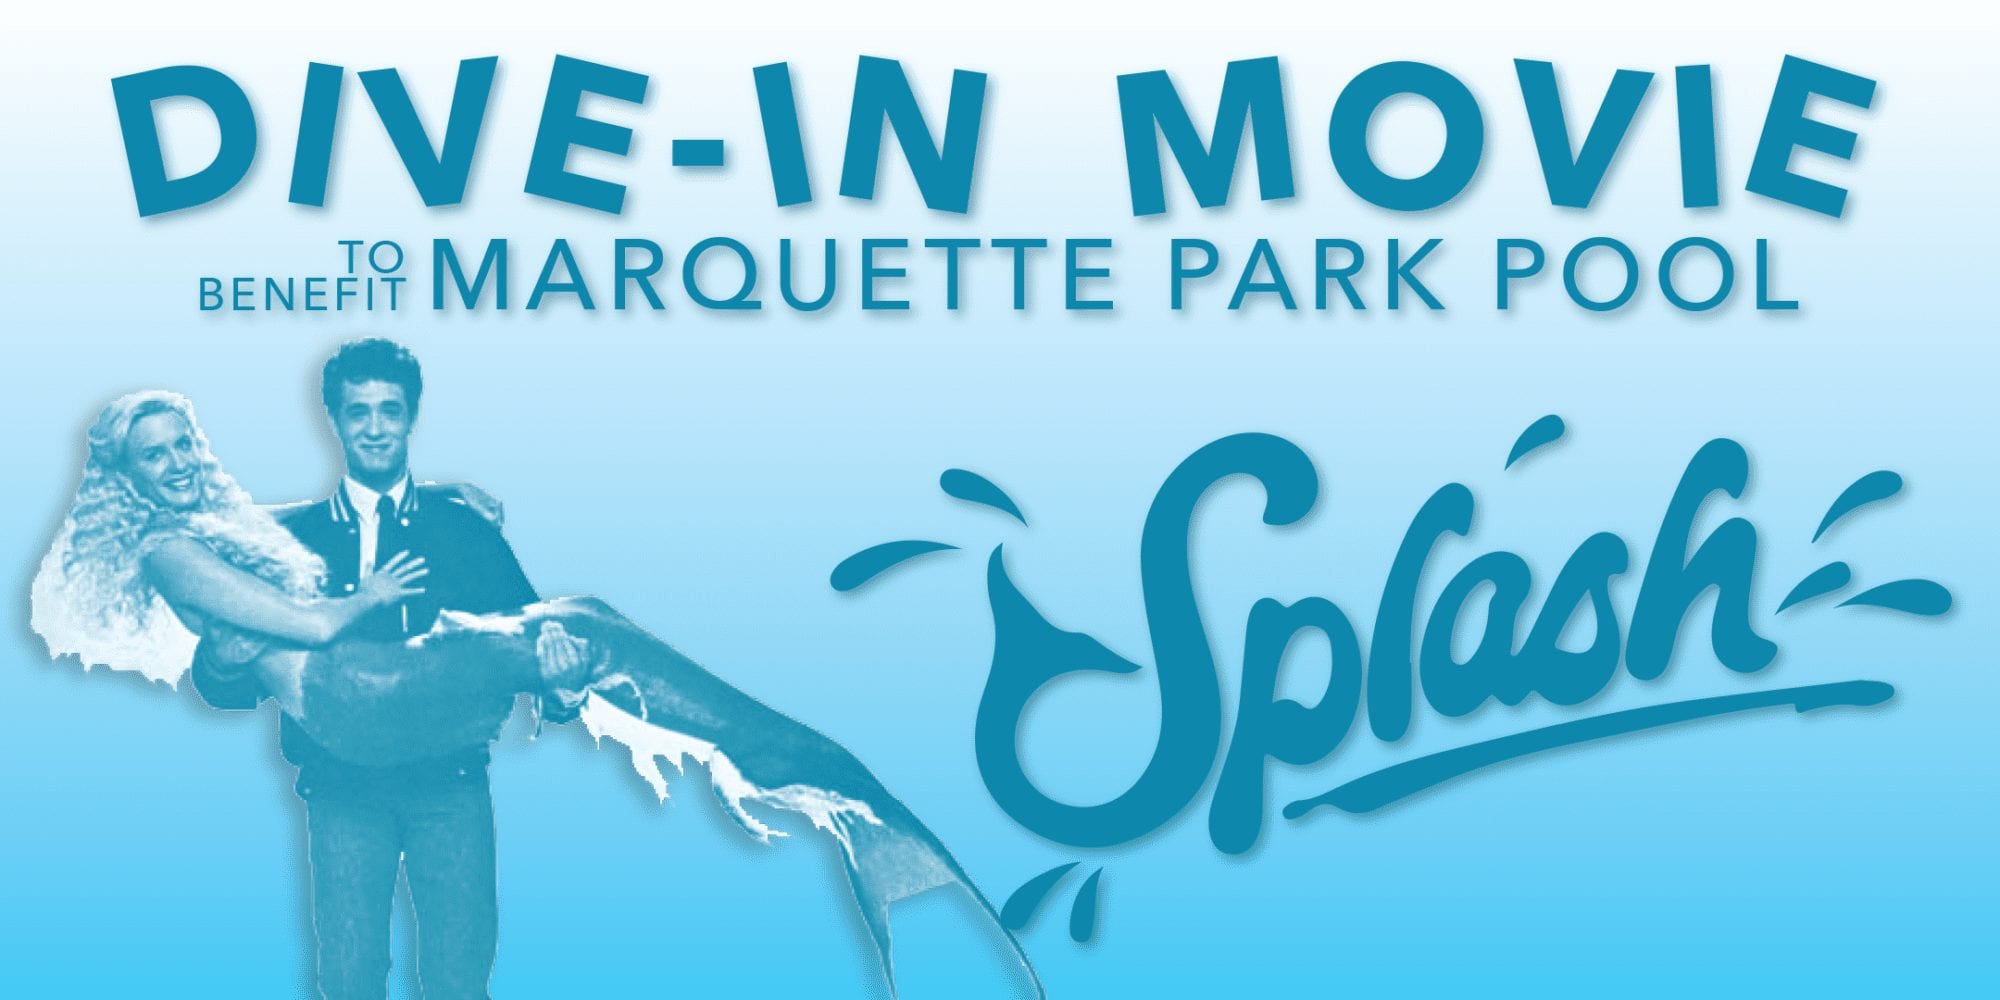 Dive-In Movie to benefit the Marquette Park Pool.